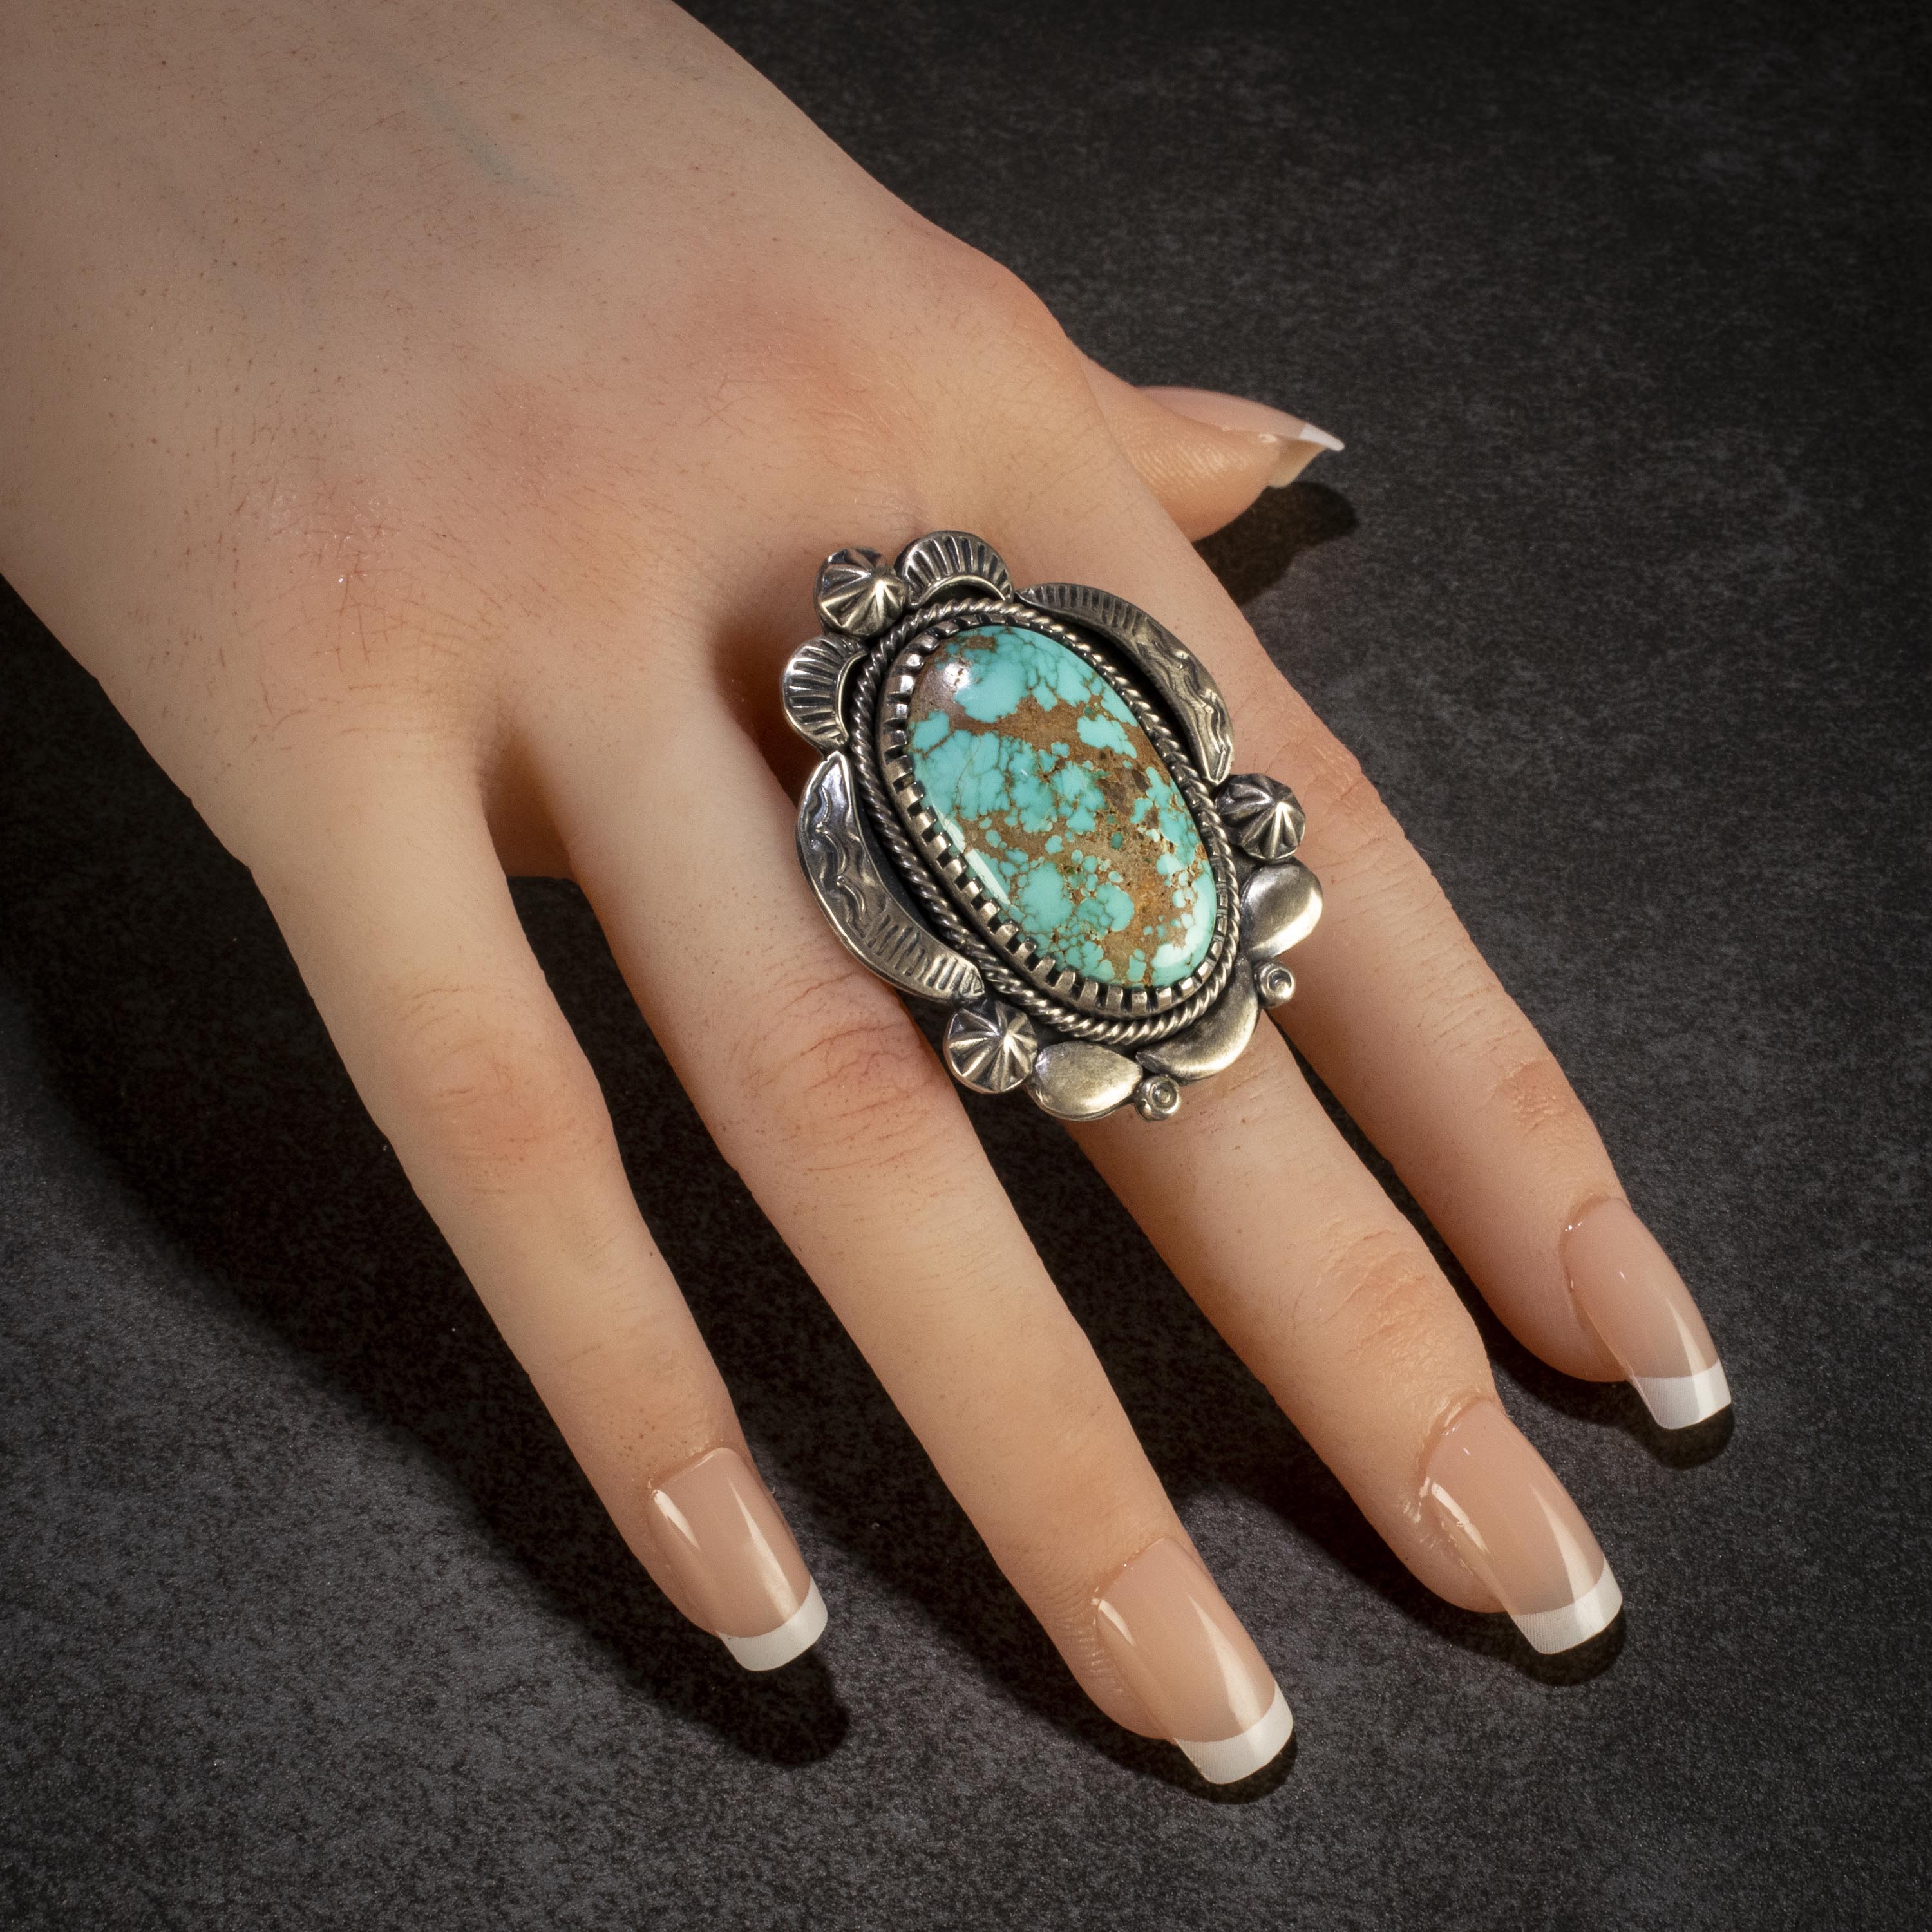 Kalifano Native American Jewelry 9.5 Marvin McReeves Navajo Carico Lake Turquoise USA Native American Made 925 Sterling Silver Ring NAR1500.021.95